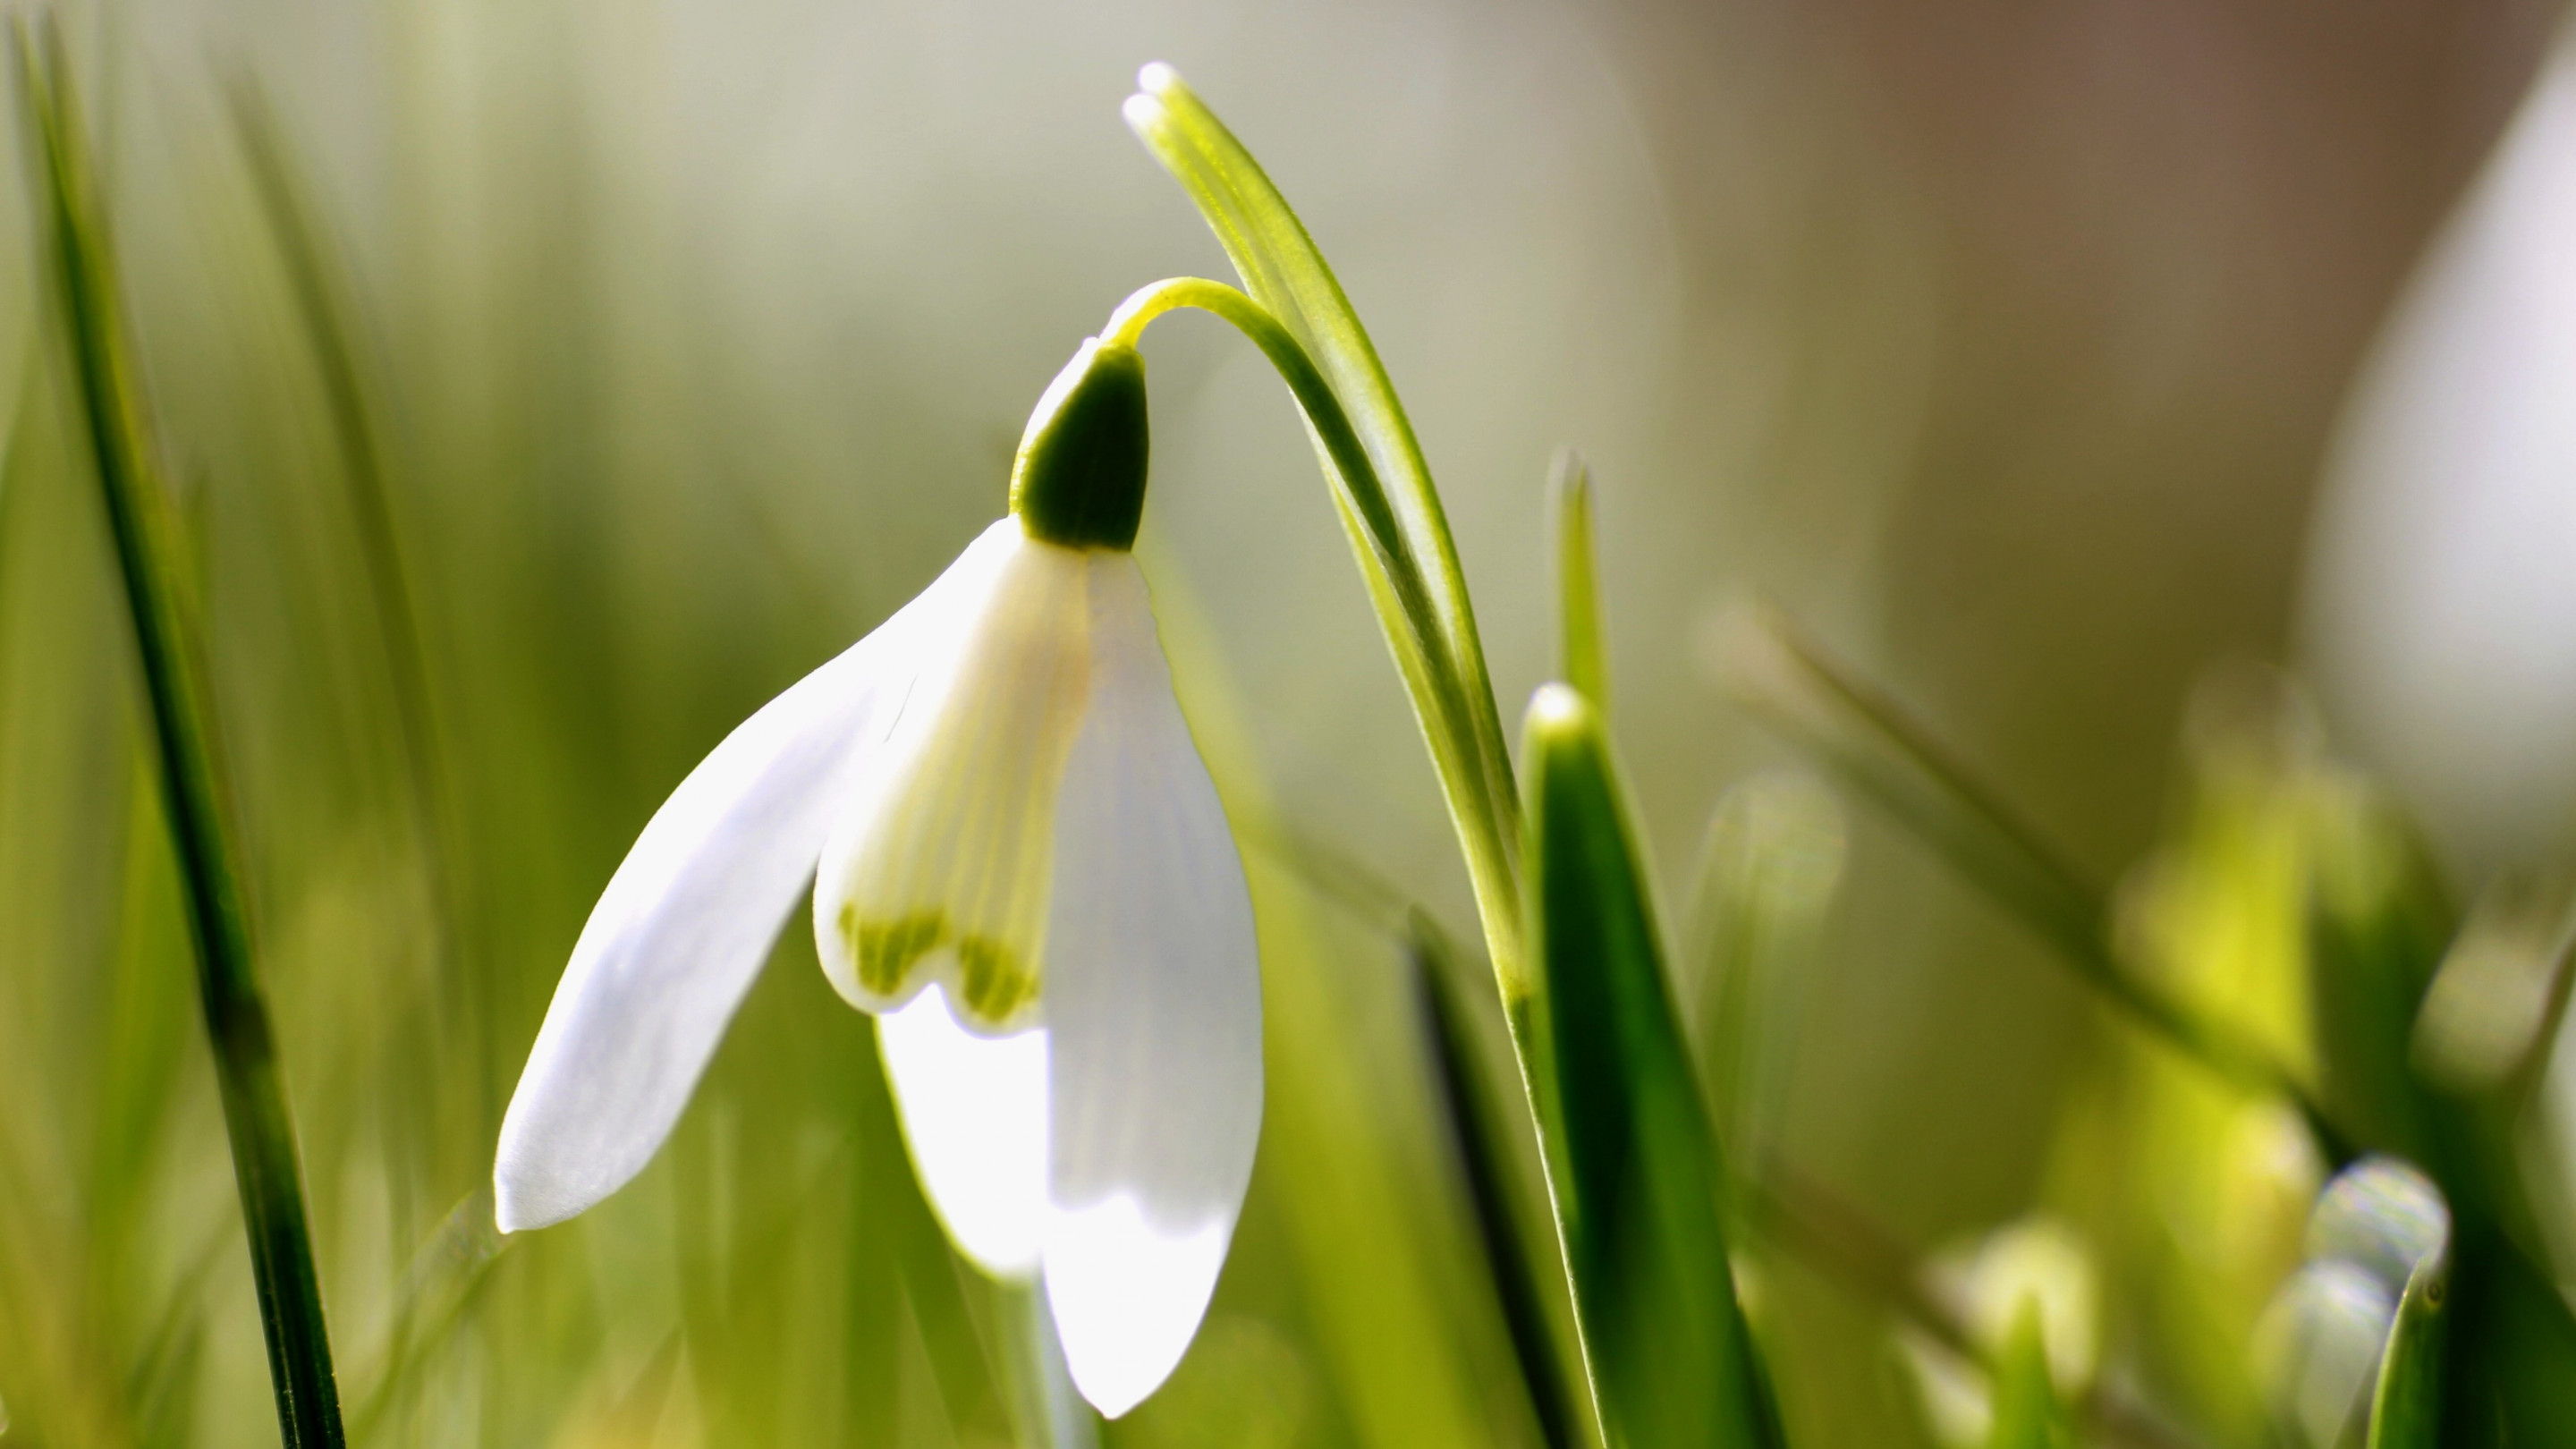 Spring is here. Snowdrop wallpaper 2880x1620